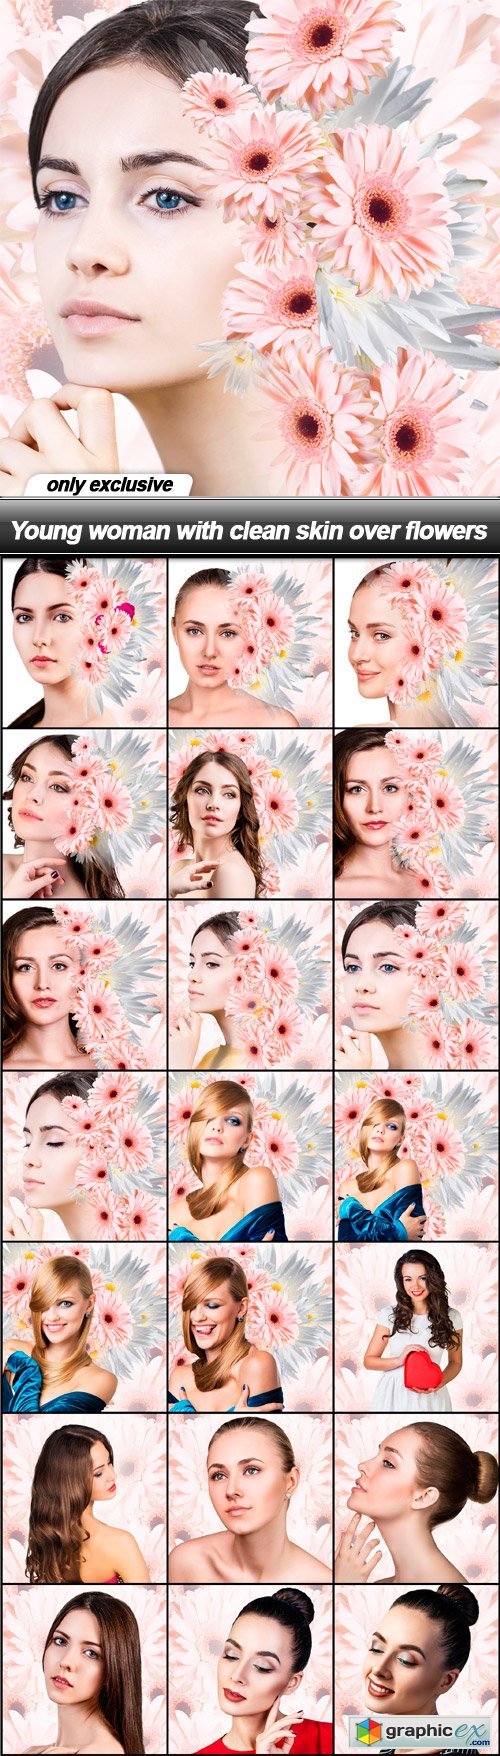 Young woman with clean skin over flowers - 21 UHQ JPEG